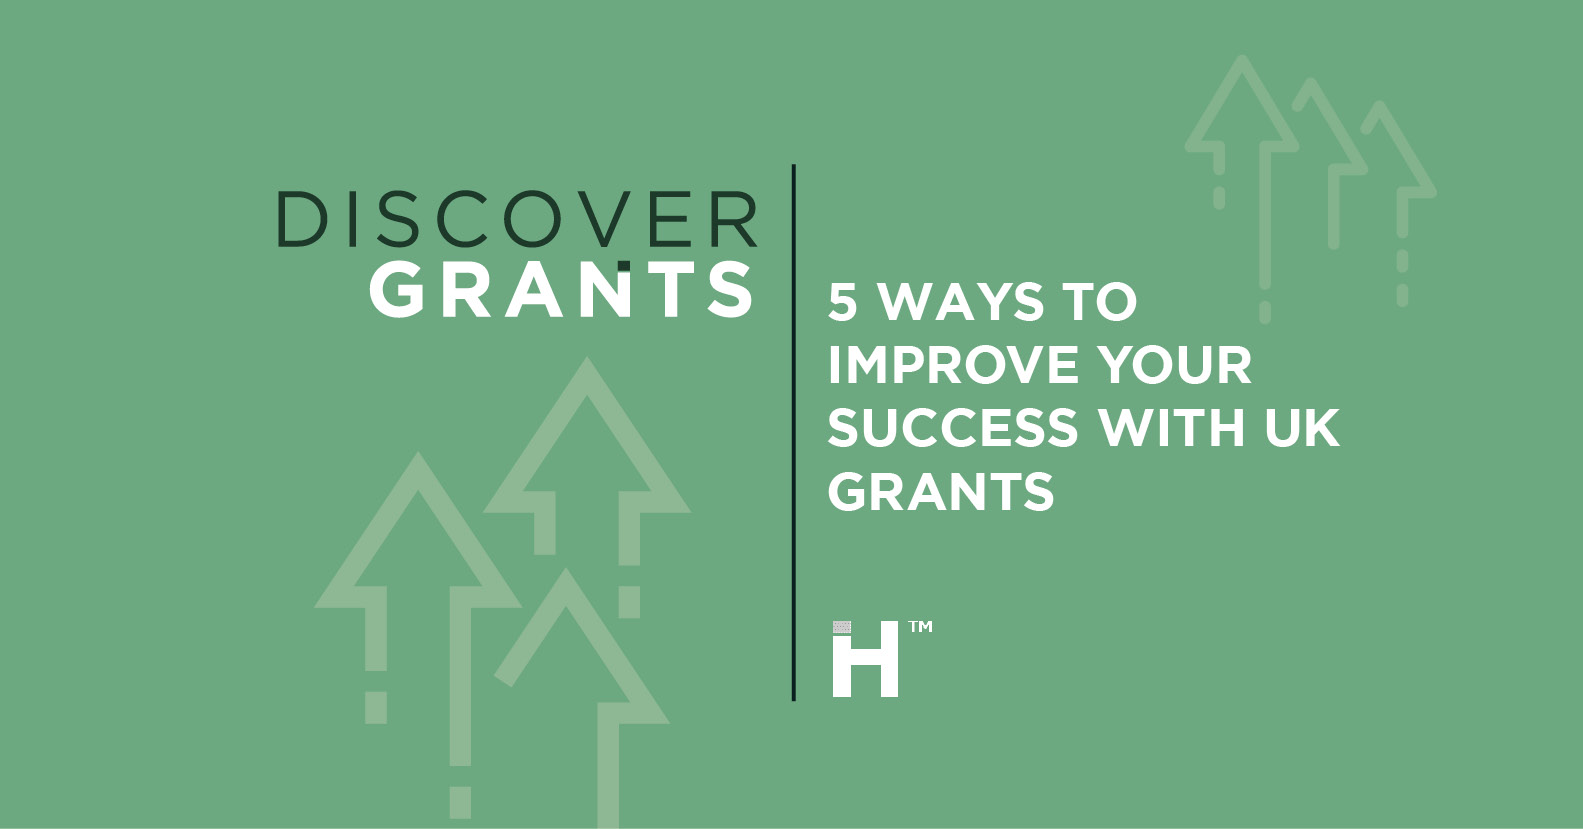 How Can I Win More UK Grants?